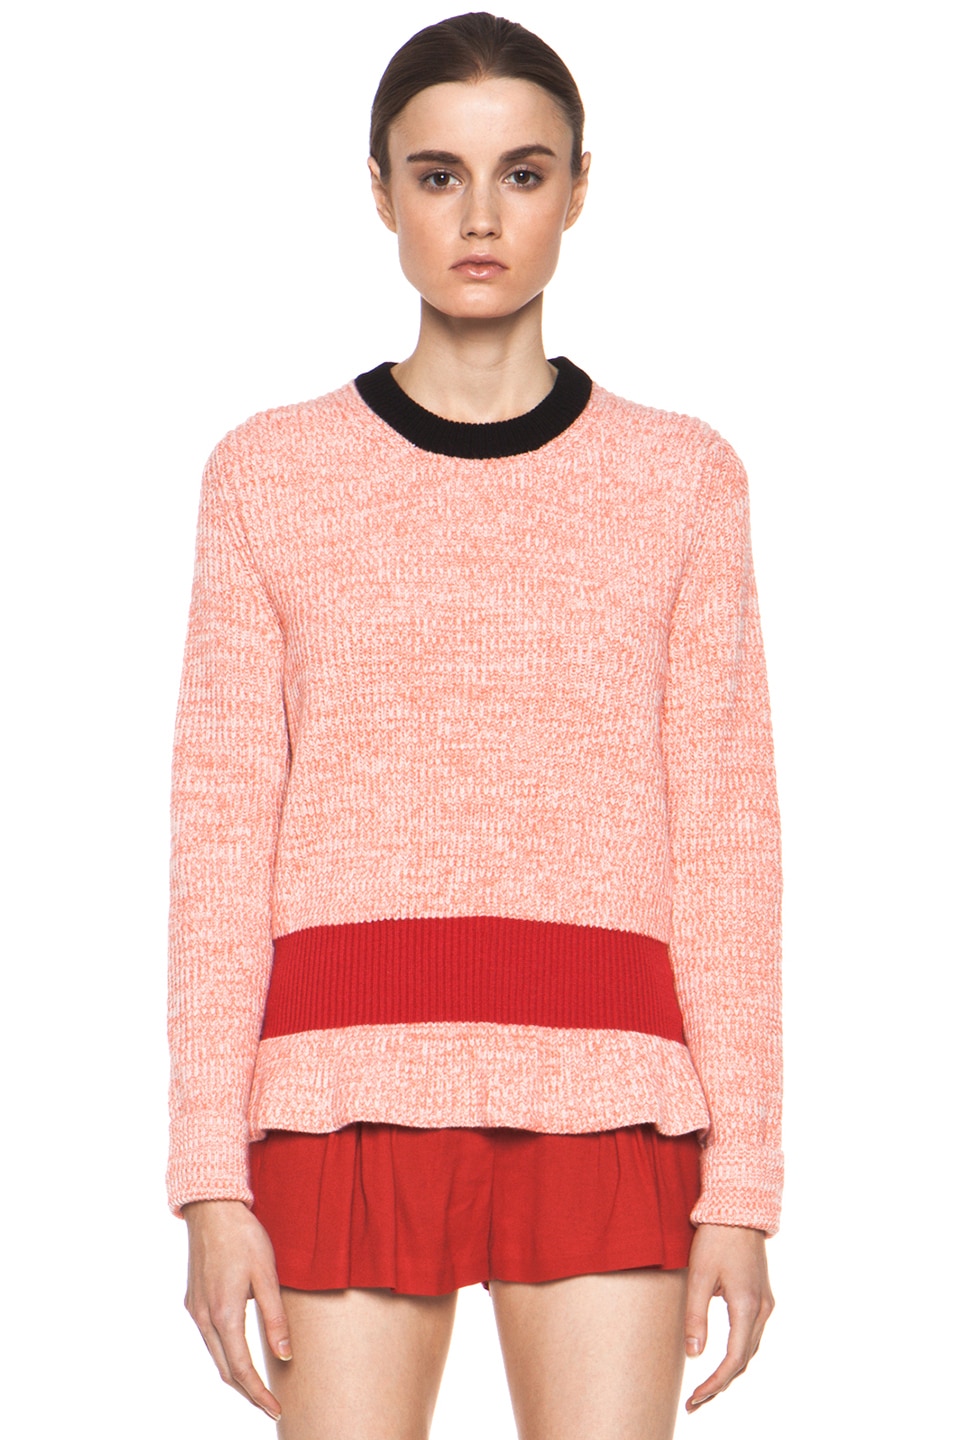 Chloe Cashmere Color Block Rib Sweater in Coral & Red & Navy | FWRD